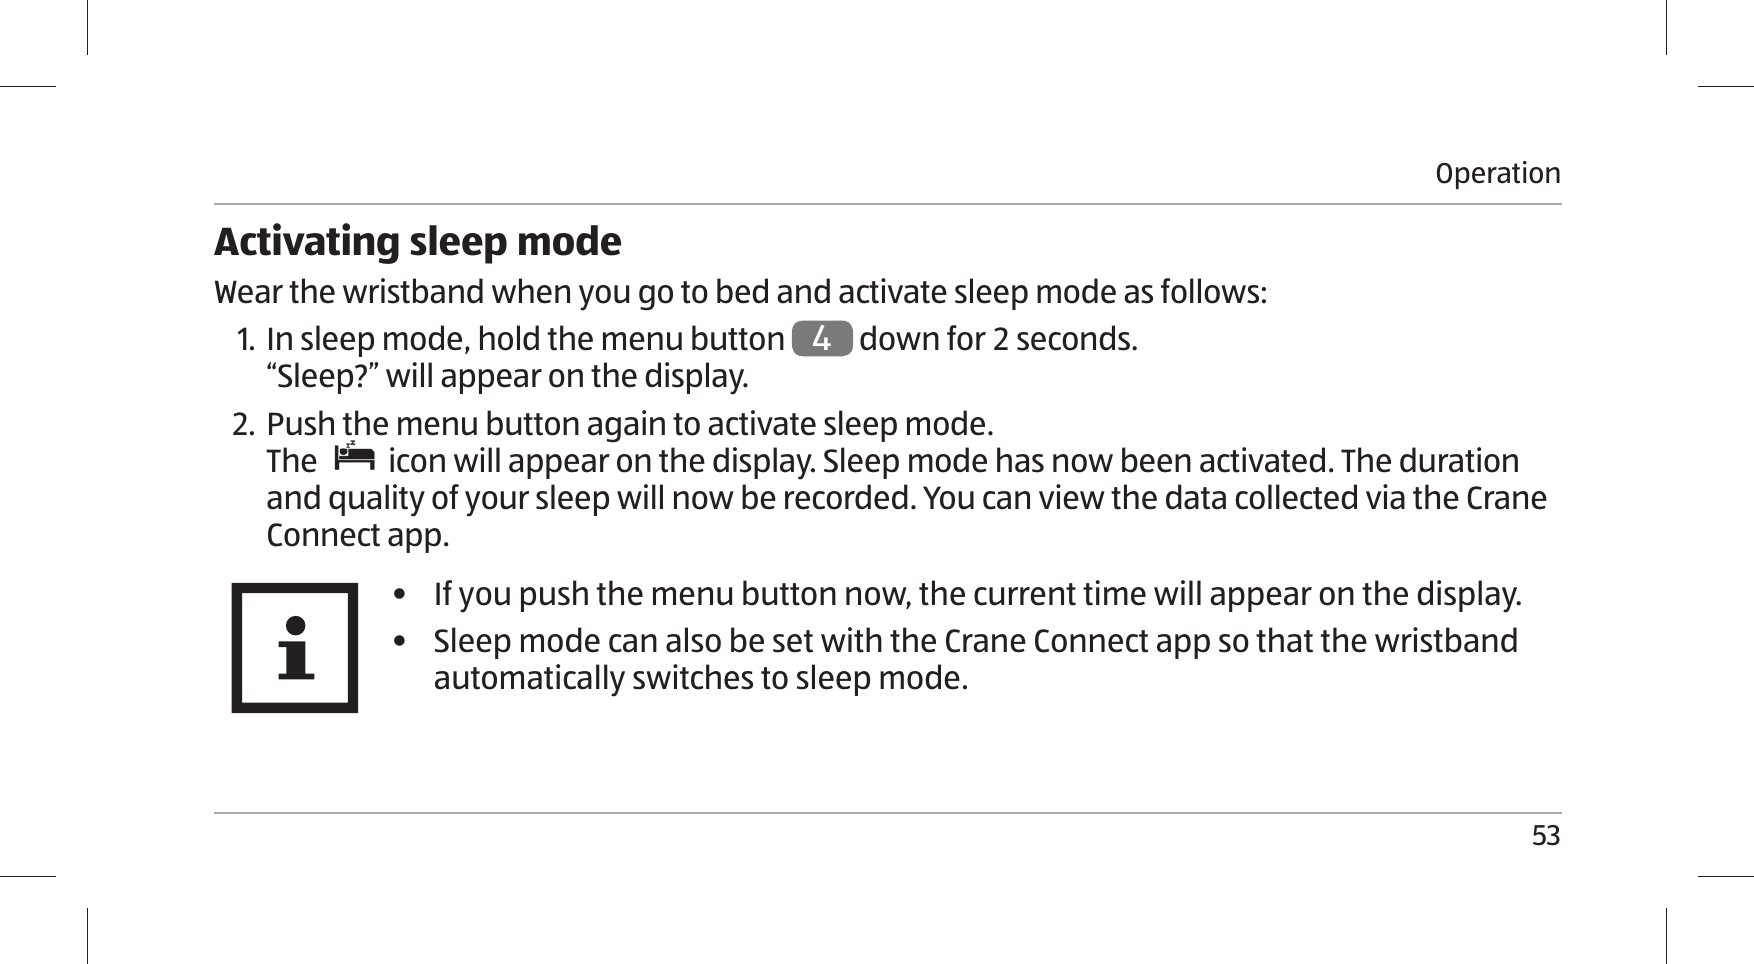 Operation53Activating sleep modeWear the wristband when you go to bed and activate sleep mode as follows:1. In sleep mode, hold the menu button 4 down for  seconds. “Sleep?” will appear on the display. 2. Push the menu button again to activate sleep mode.The   icon will appear on the display. Sleep mode has now been activated. The duration and quality of your sleep will now be recorded. You can view the data collected via the Crane Connect app.•  If you push the menu button now, the current time will appear on the display.•  Sleep mode can also be set with the Crane Connect app so that the wristband automatically switches to sleep mode.